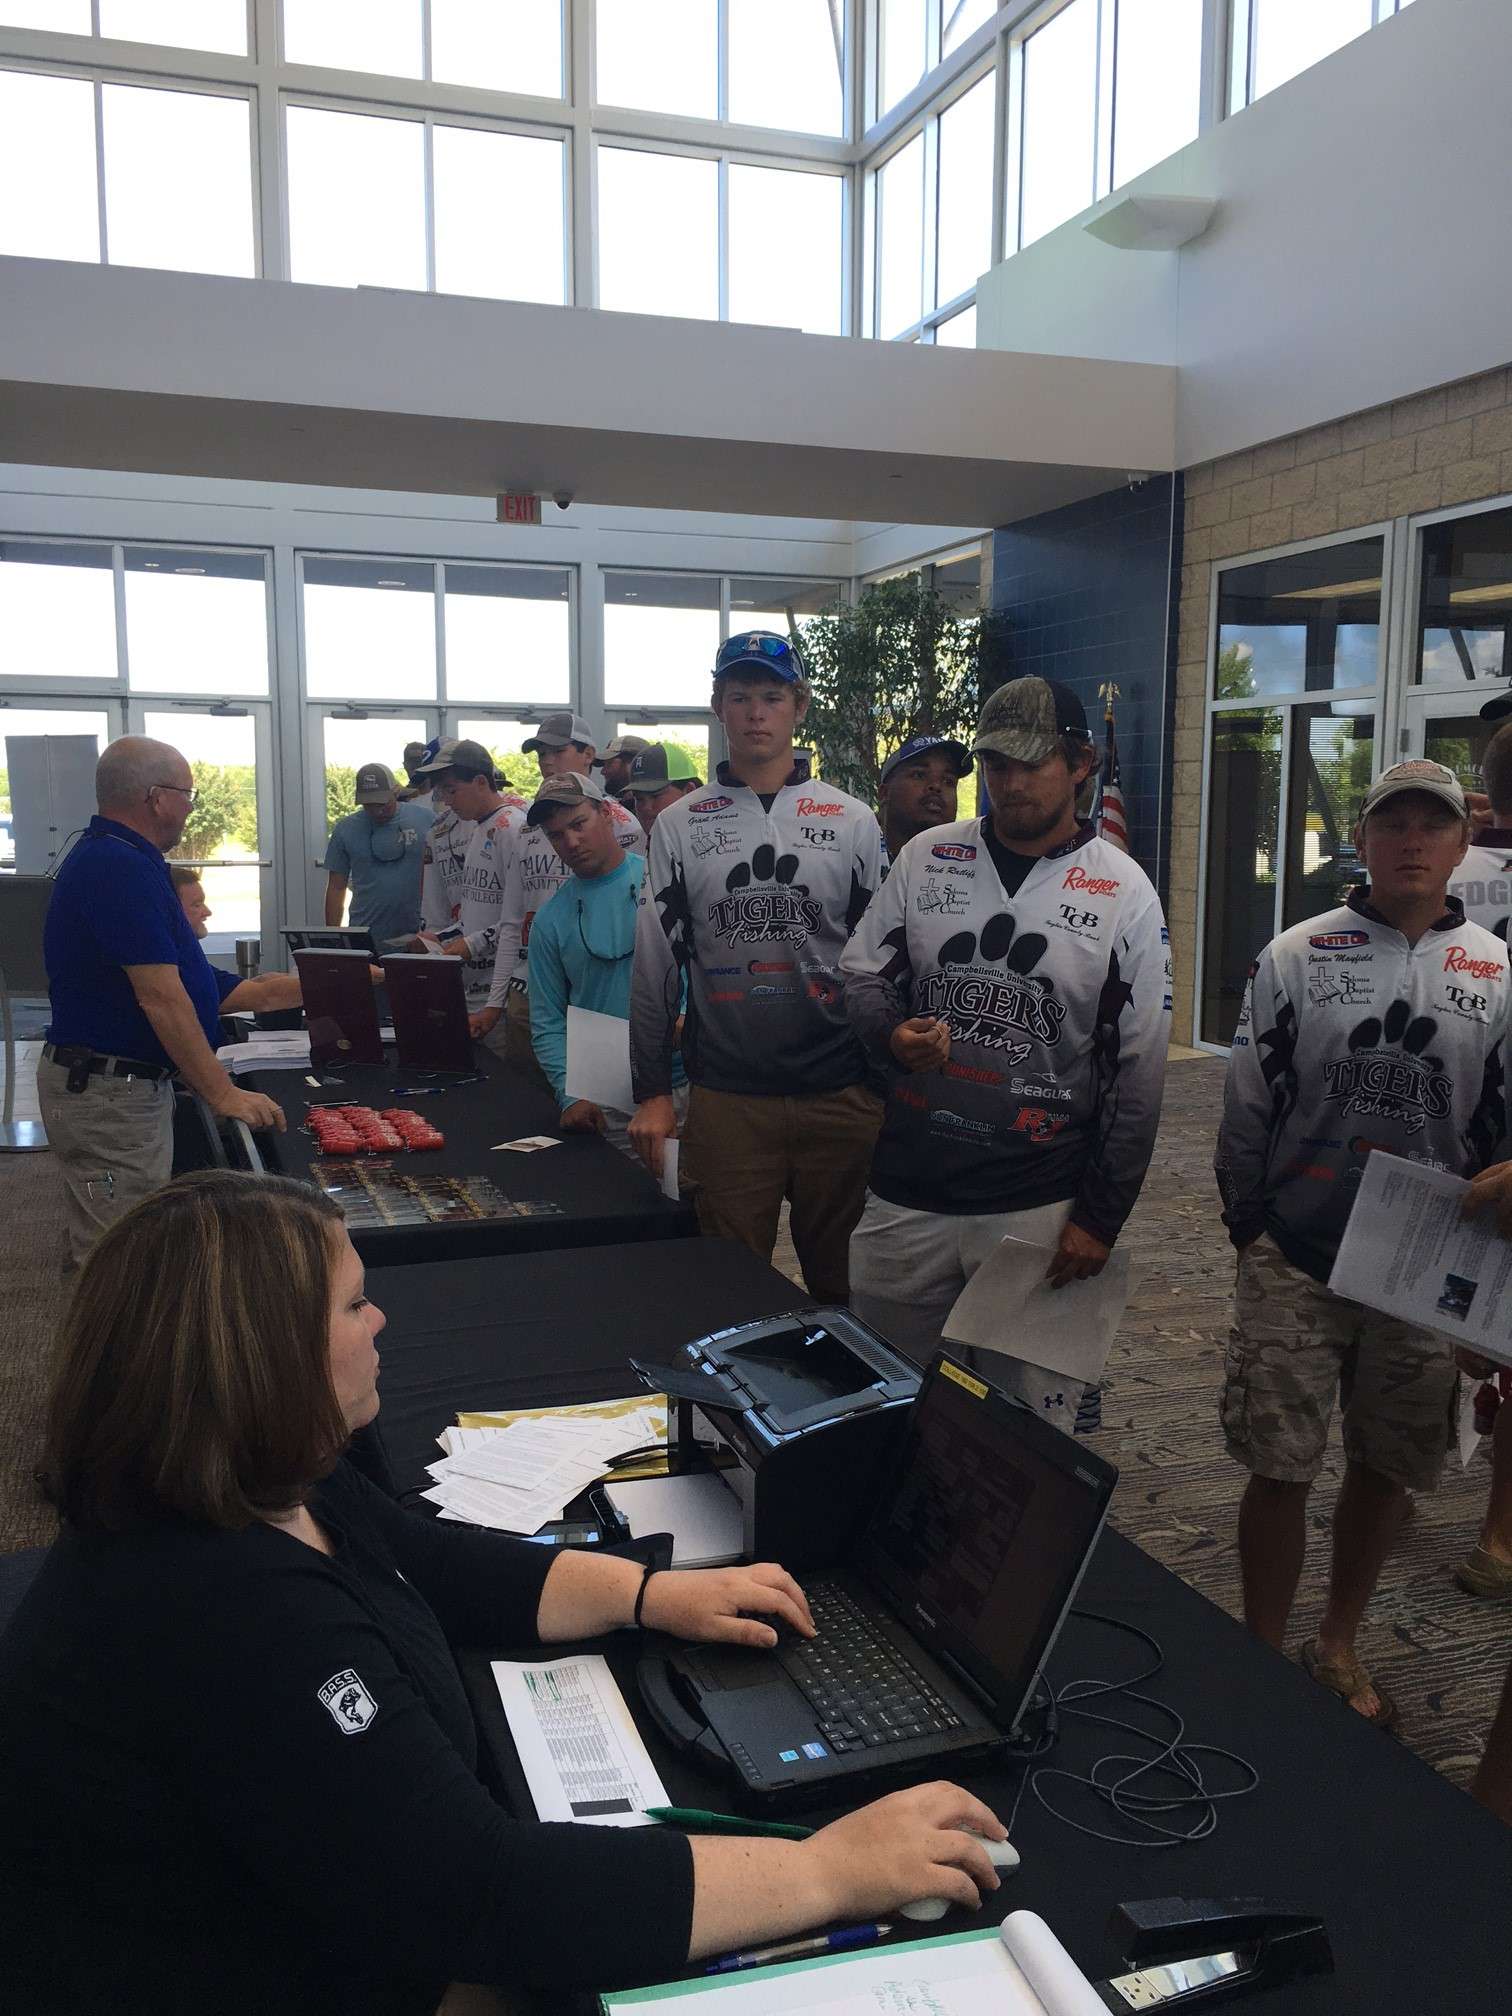 Campbellsville University anglers check in. These anglers are eager to earn a berth to the champ since Campbellsville University will be site of this yearâs champ. 